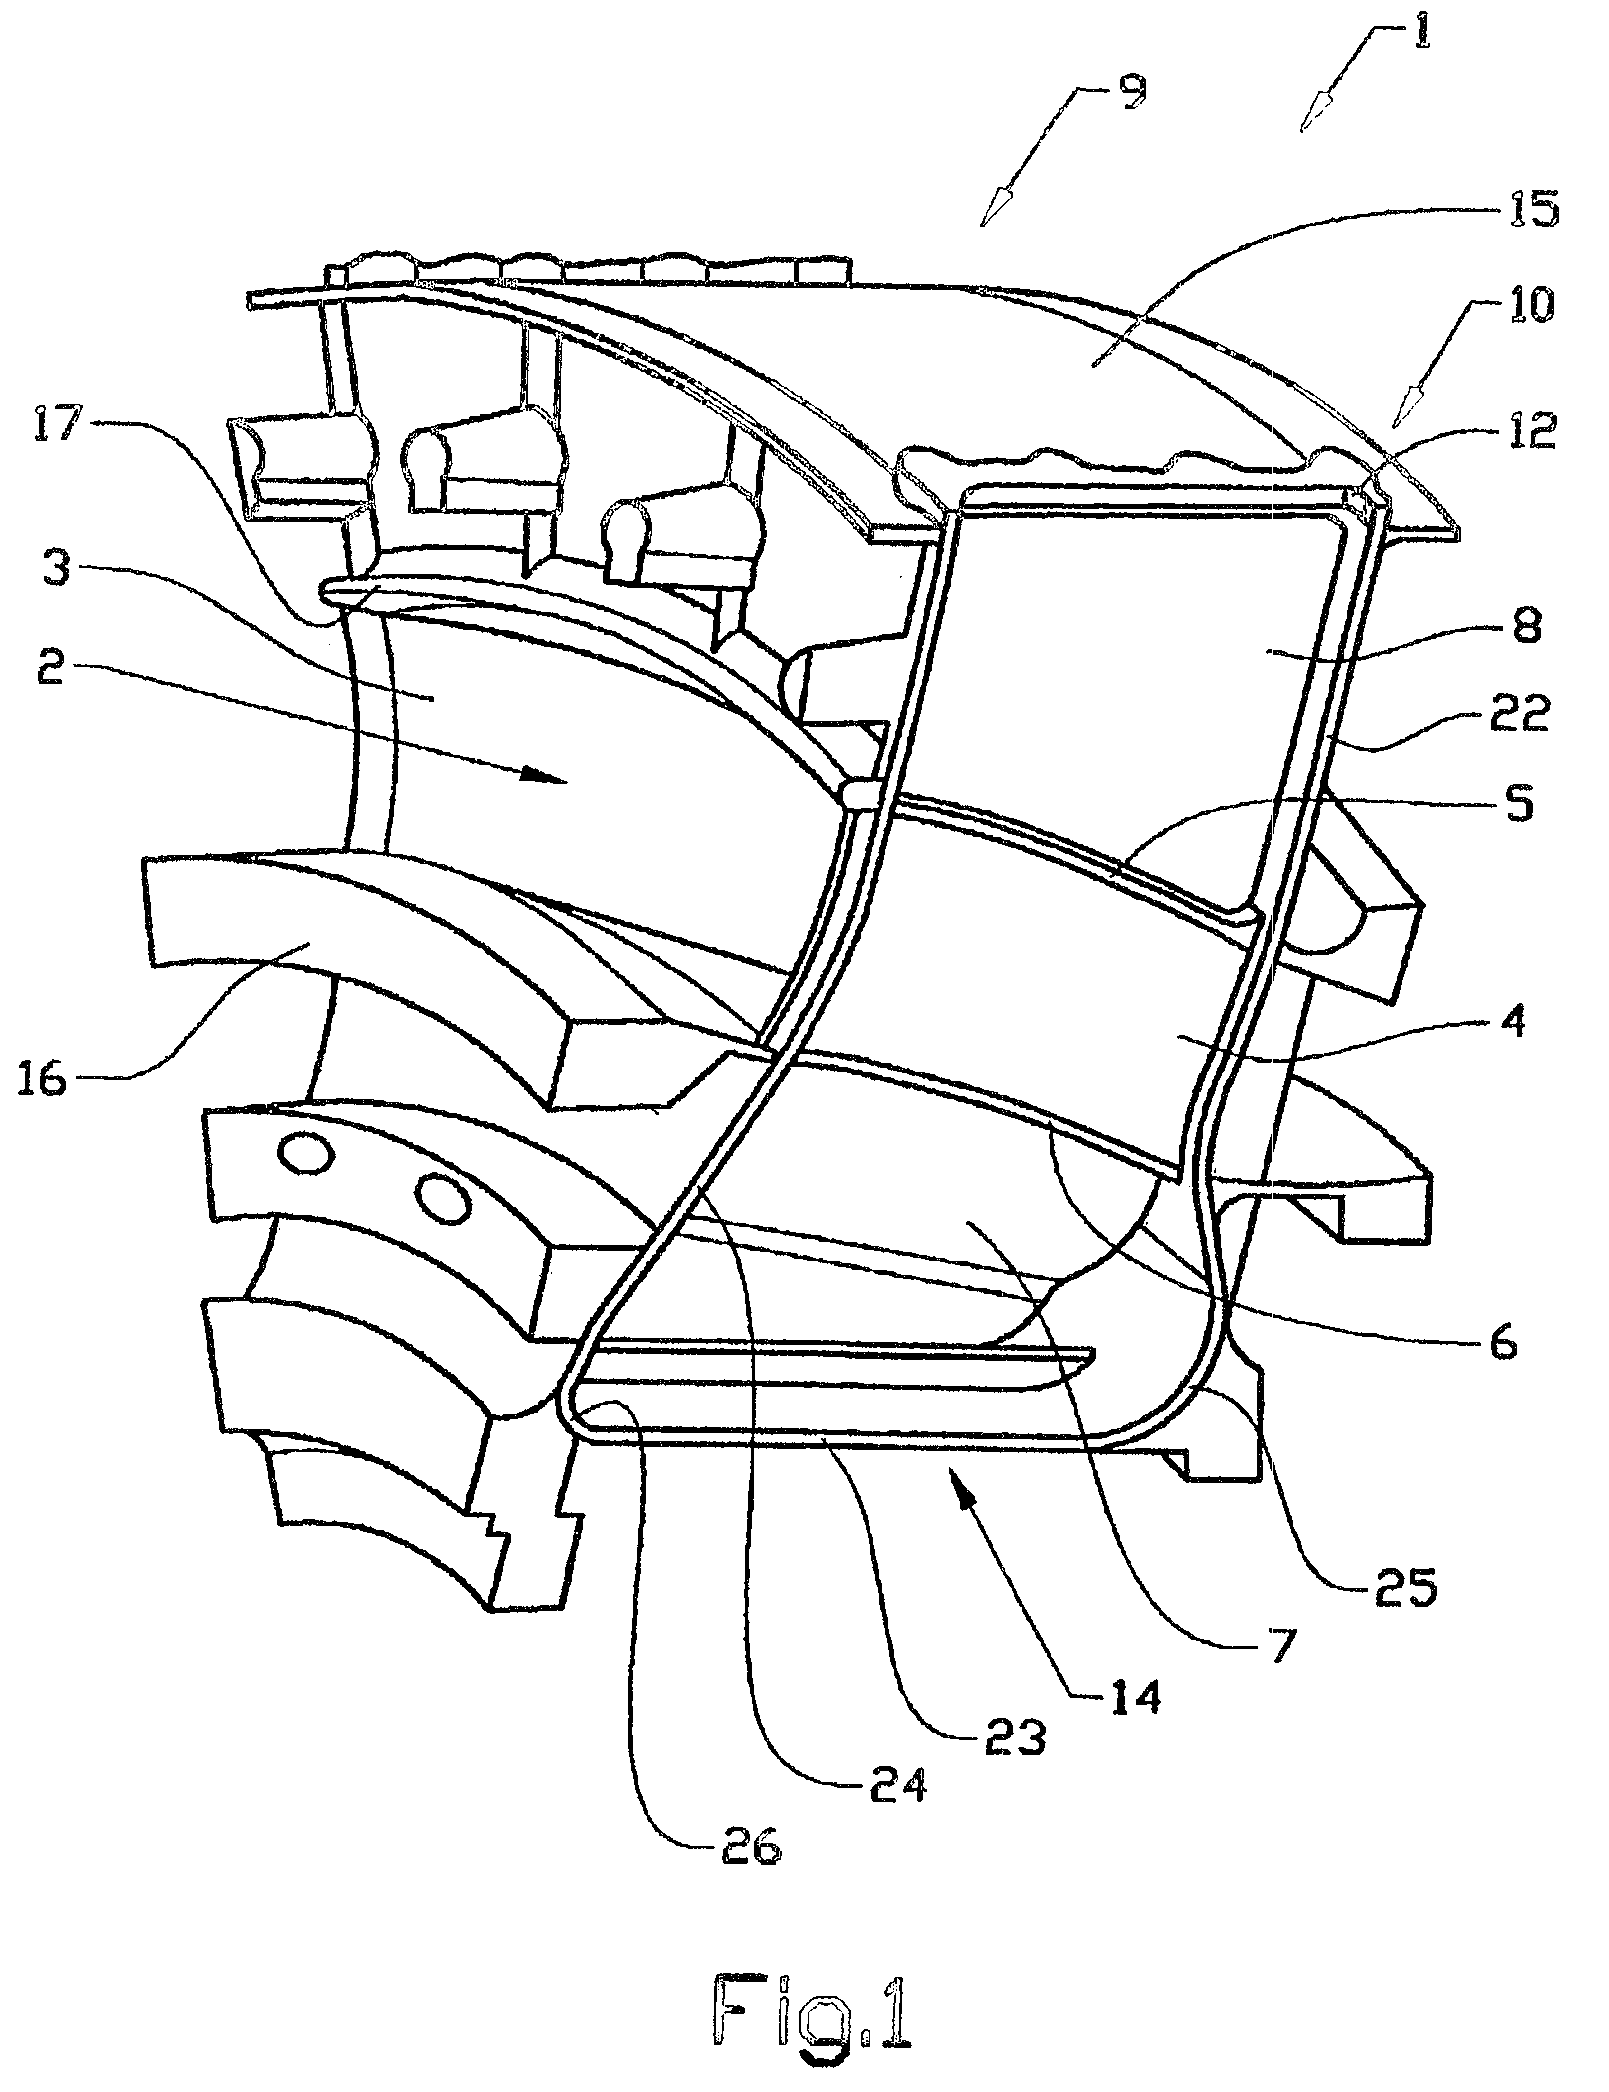 Method of manufacturing a stator component